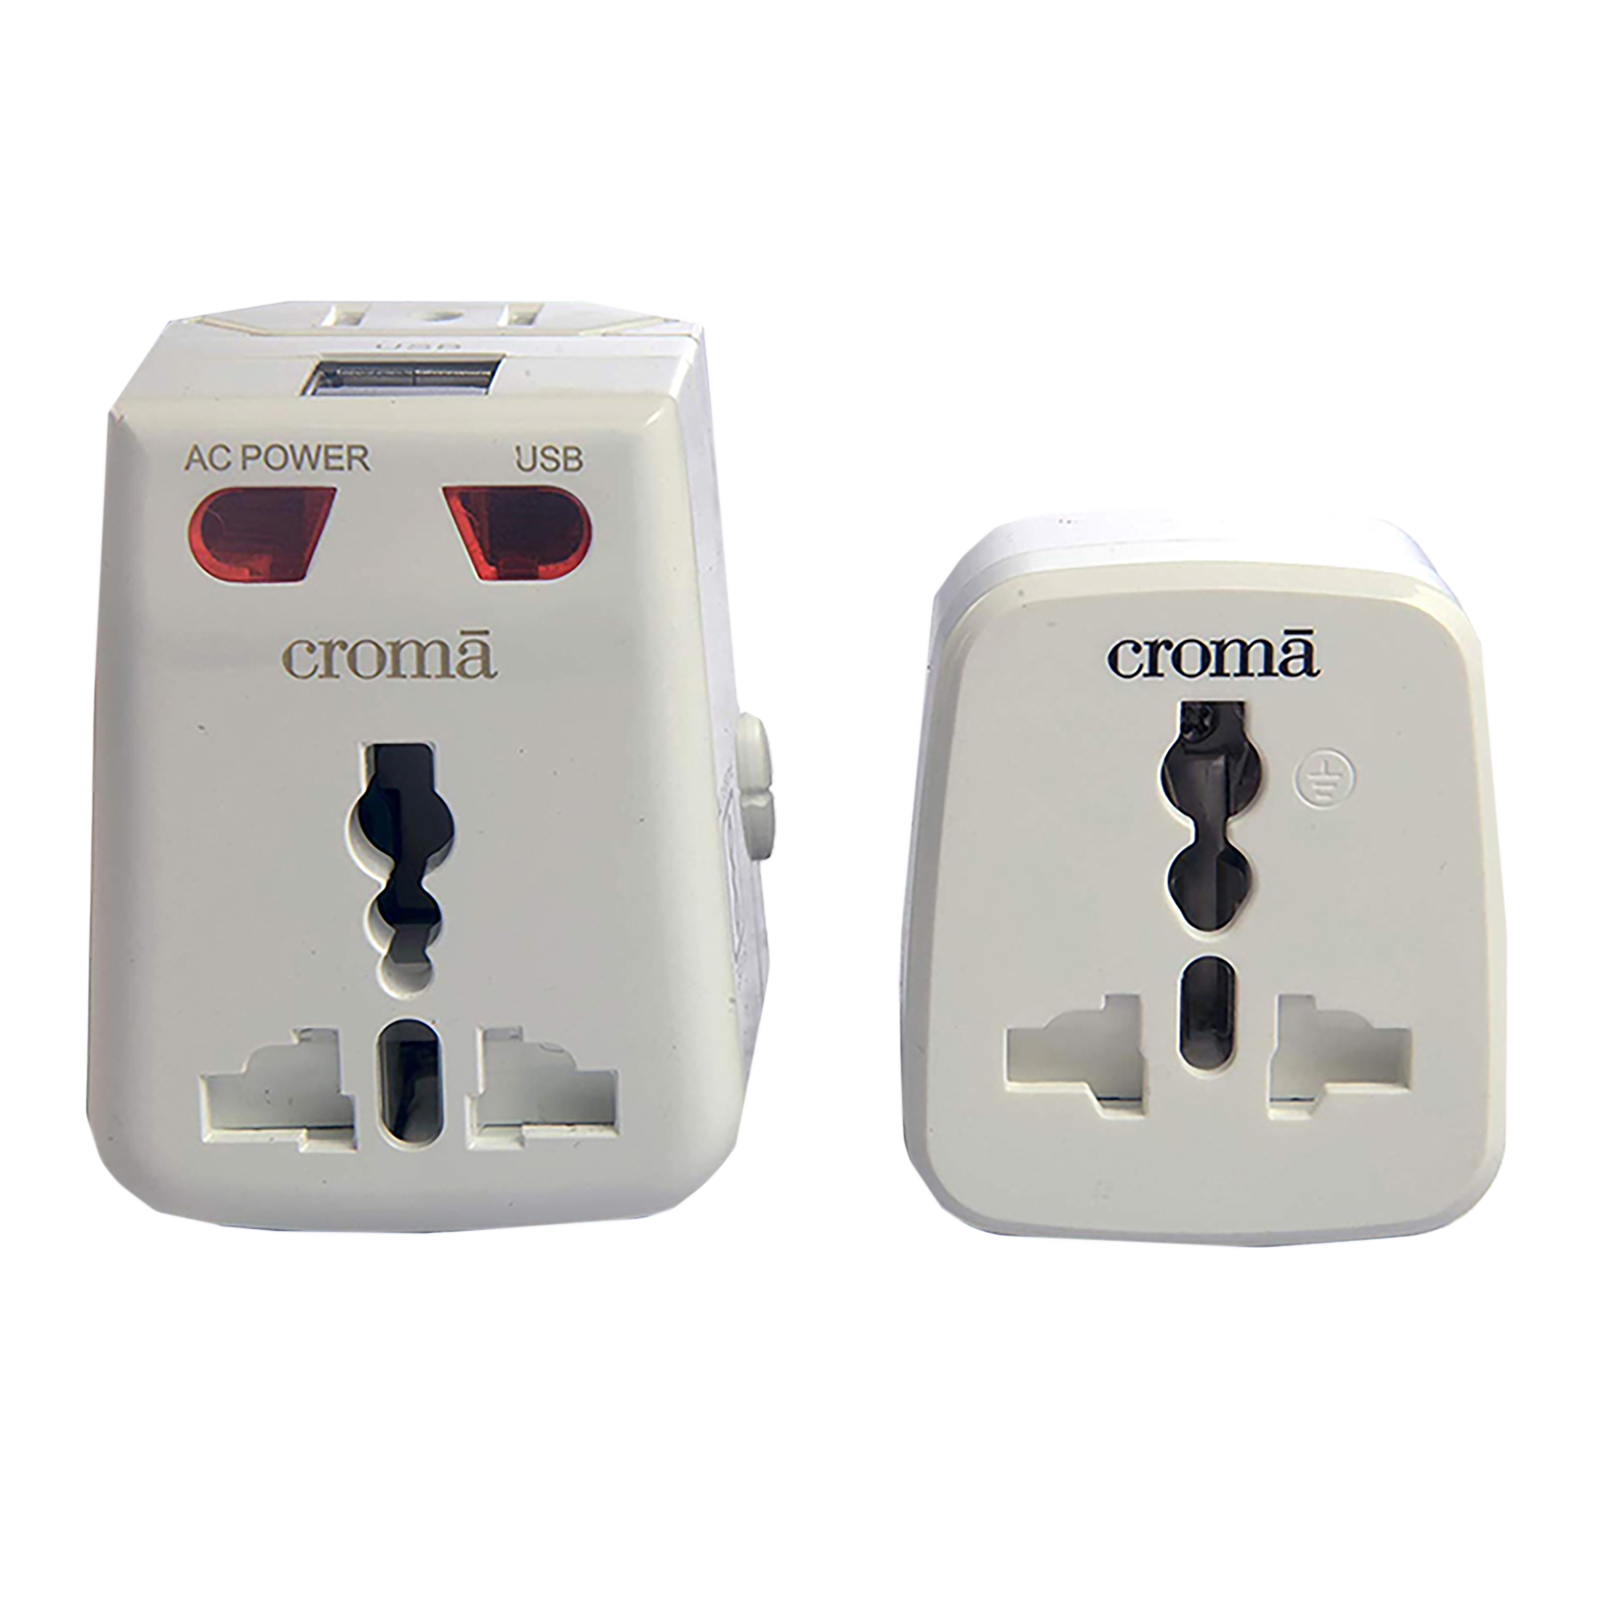 https://media.croma.com/image/upload/v1697622142/Croma%20Assets/Computers%20Peripherals/Chargers%20and%20Batteries/Images/215973_r7t6rc.png